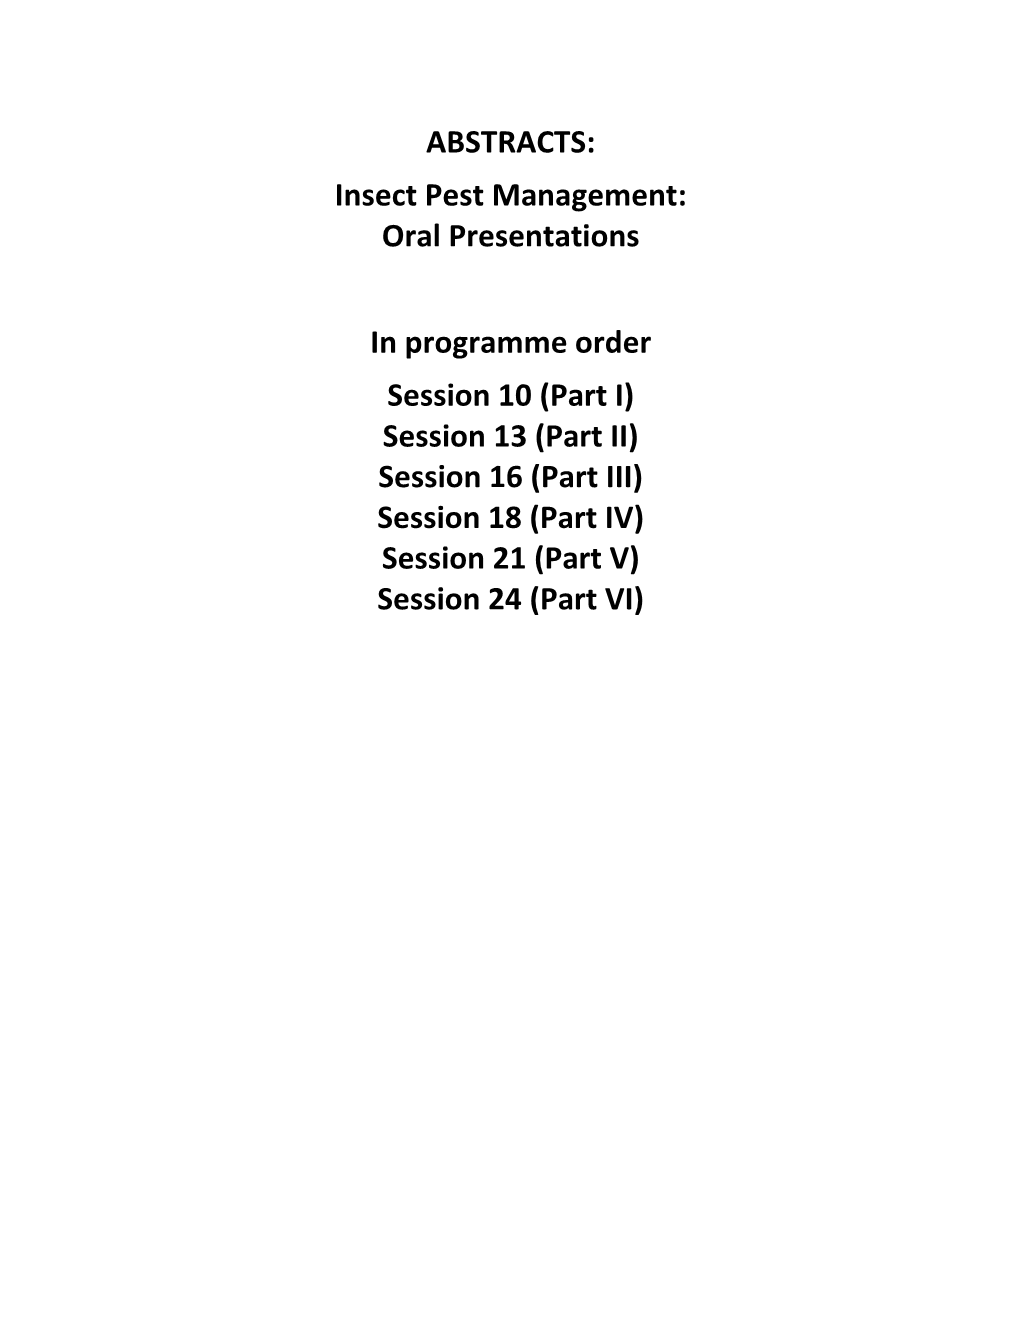 Insect Pest Management: Oral Presentations in Programme Order